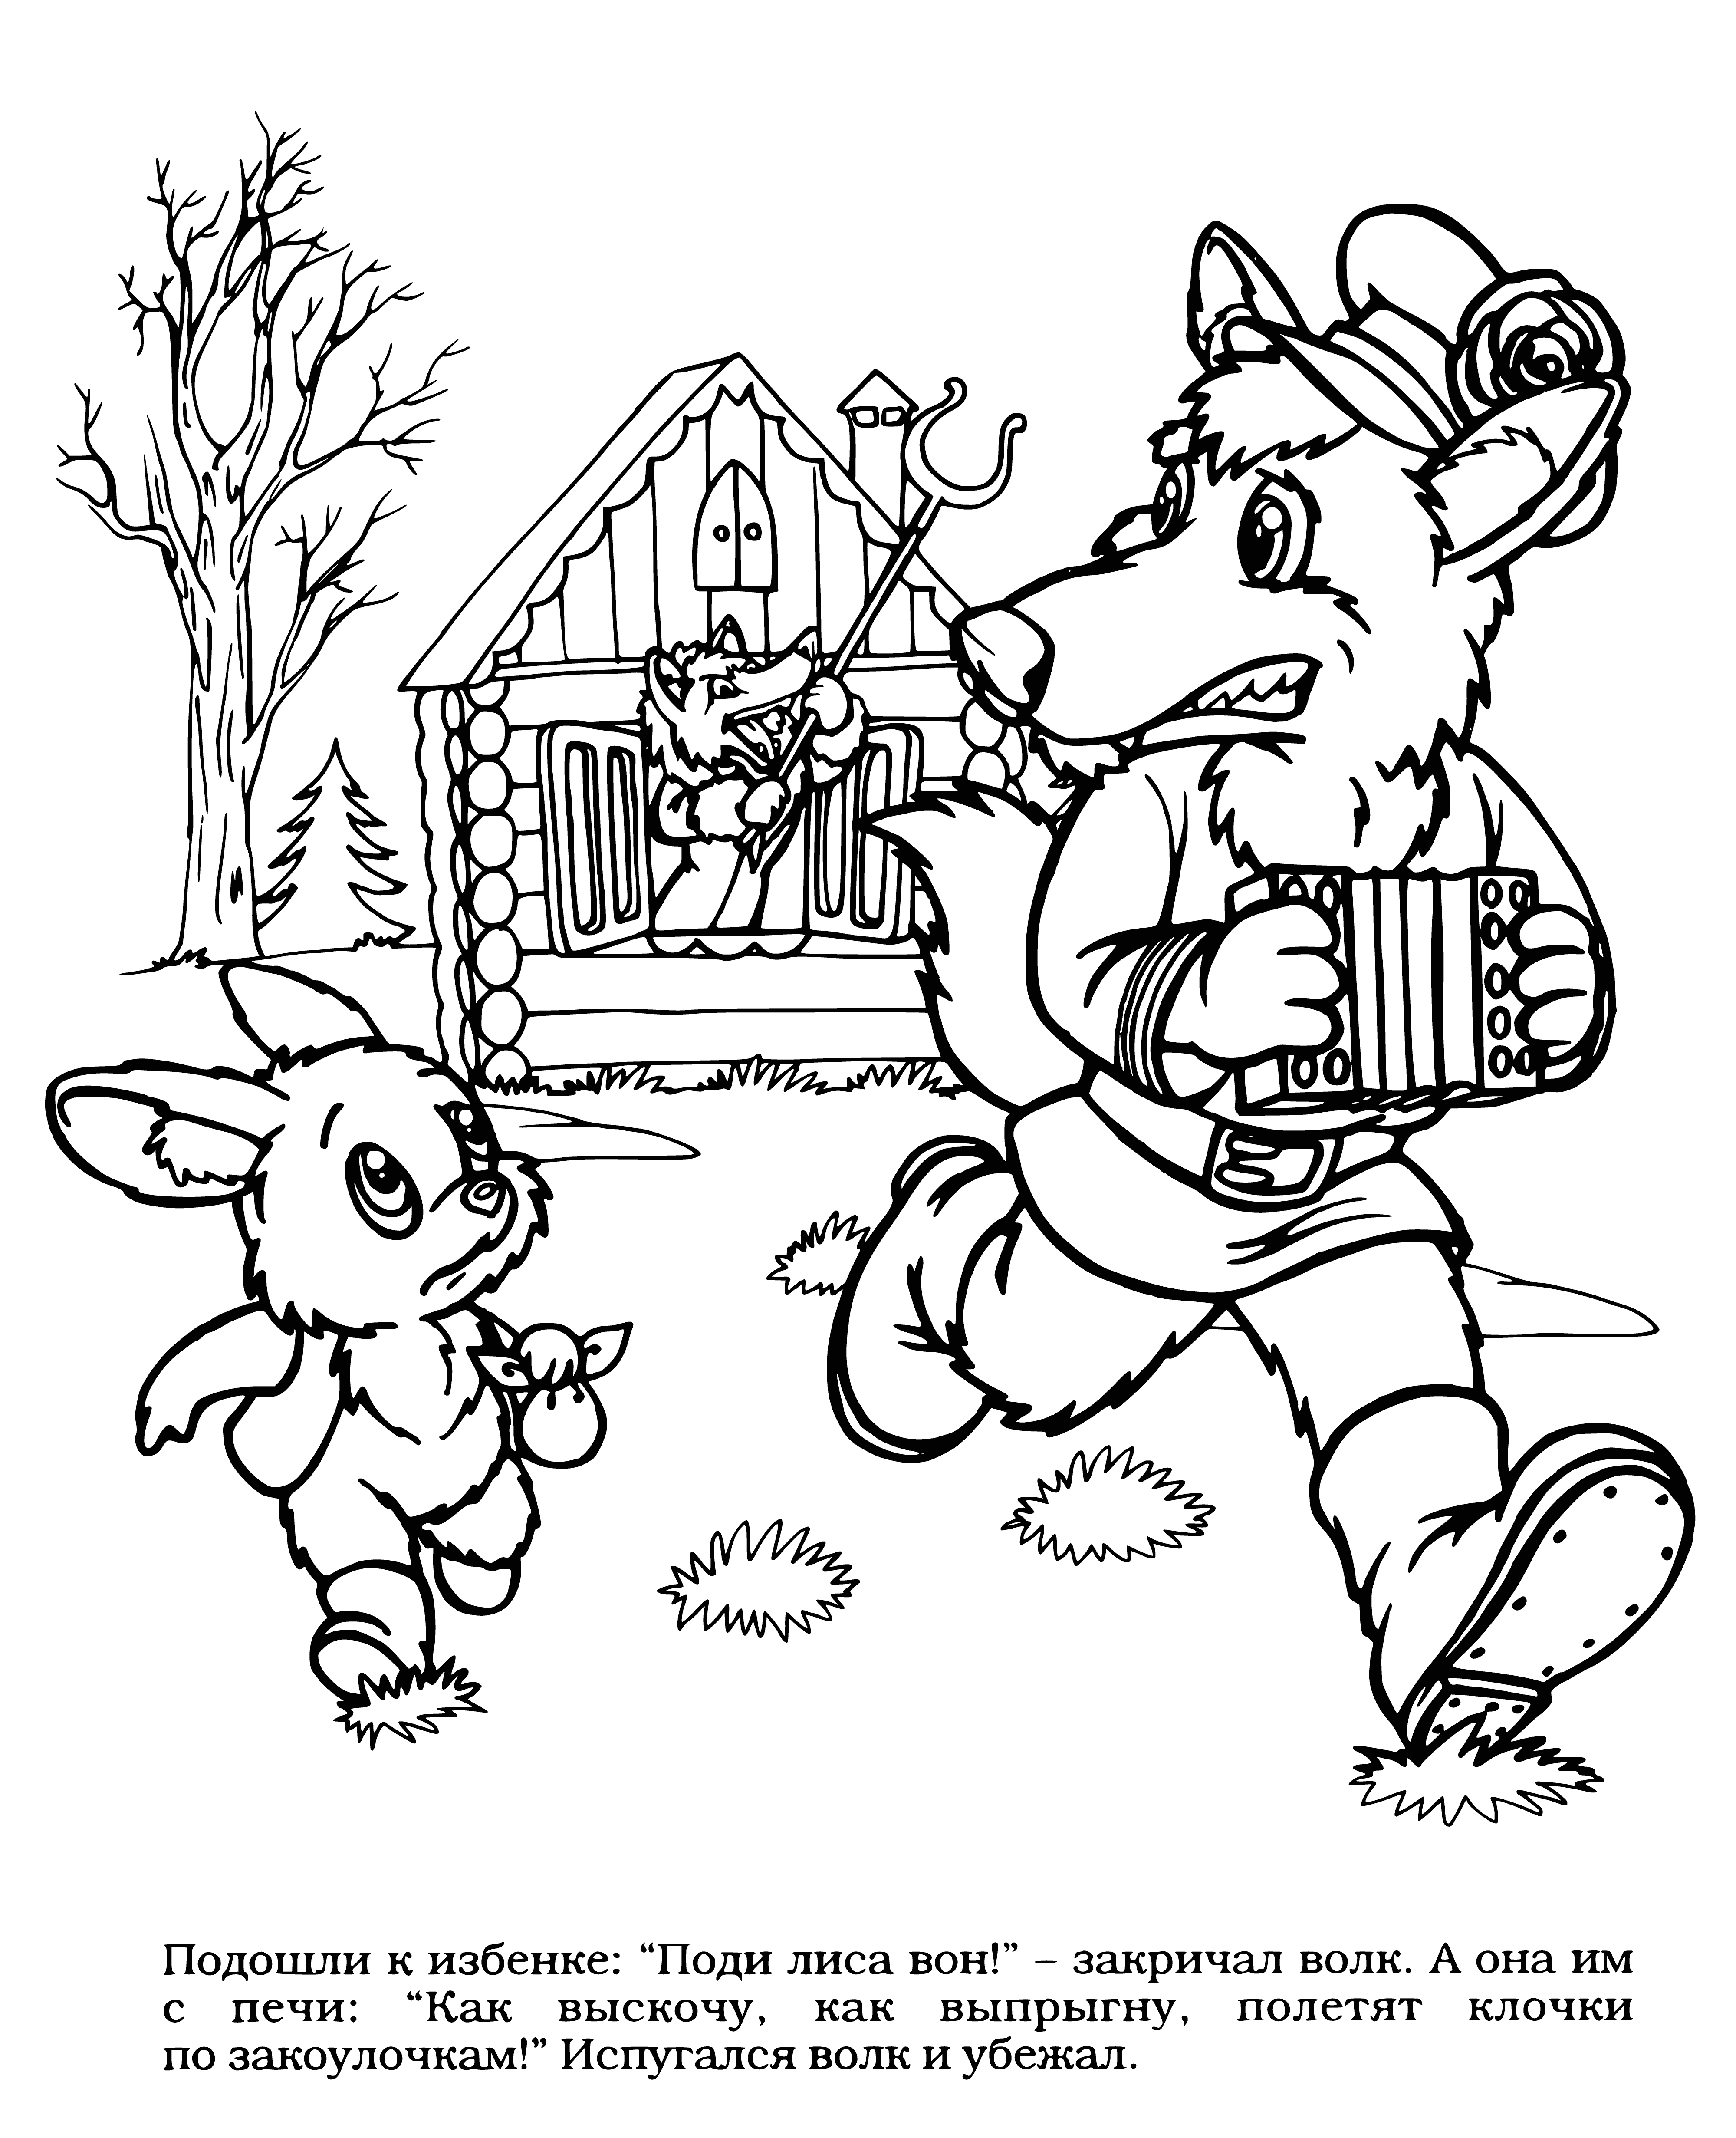 coloring page: Folk tale of wolf running away from hunter; wolf escapes before it's caught.